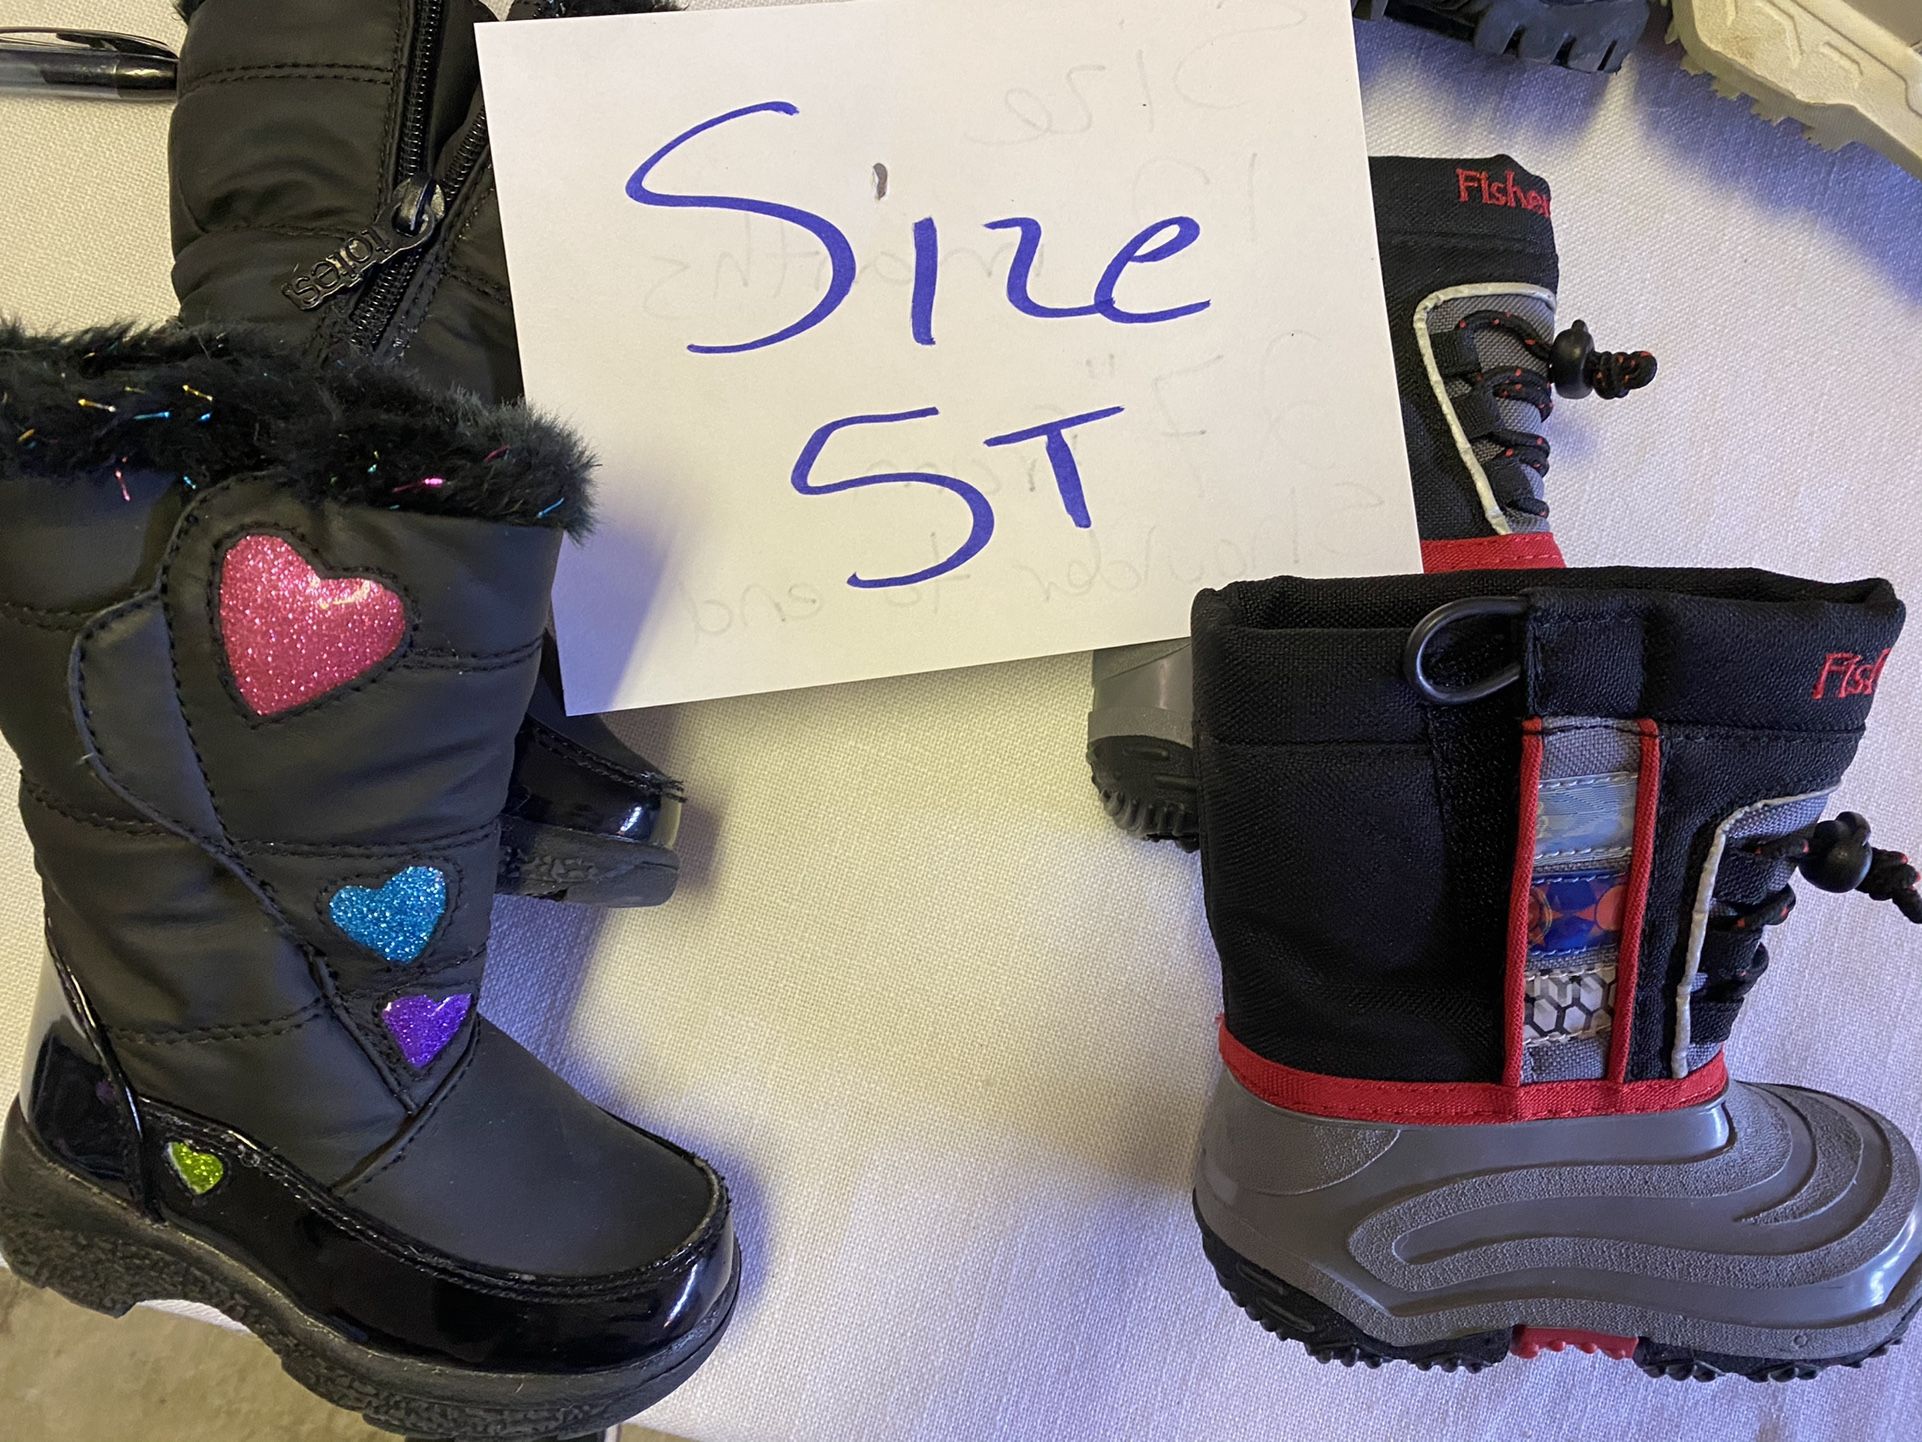 Snow Boots Size 5t $20 Each